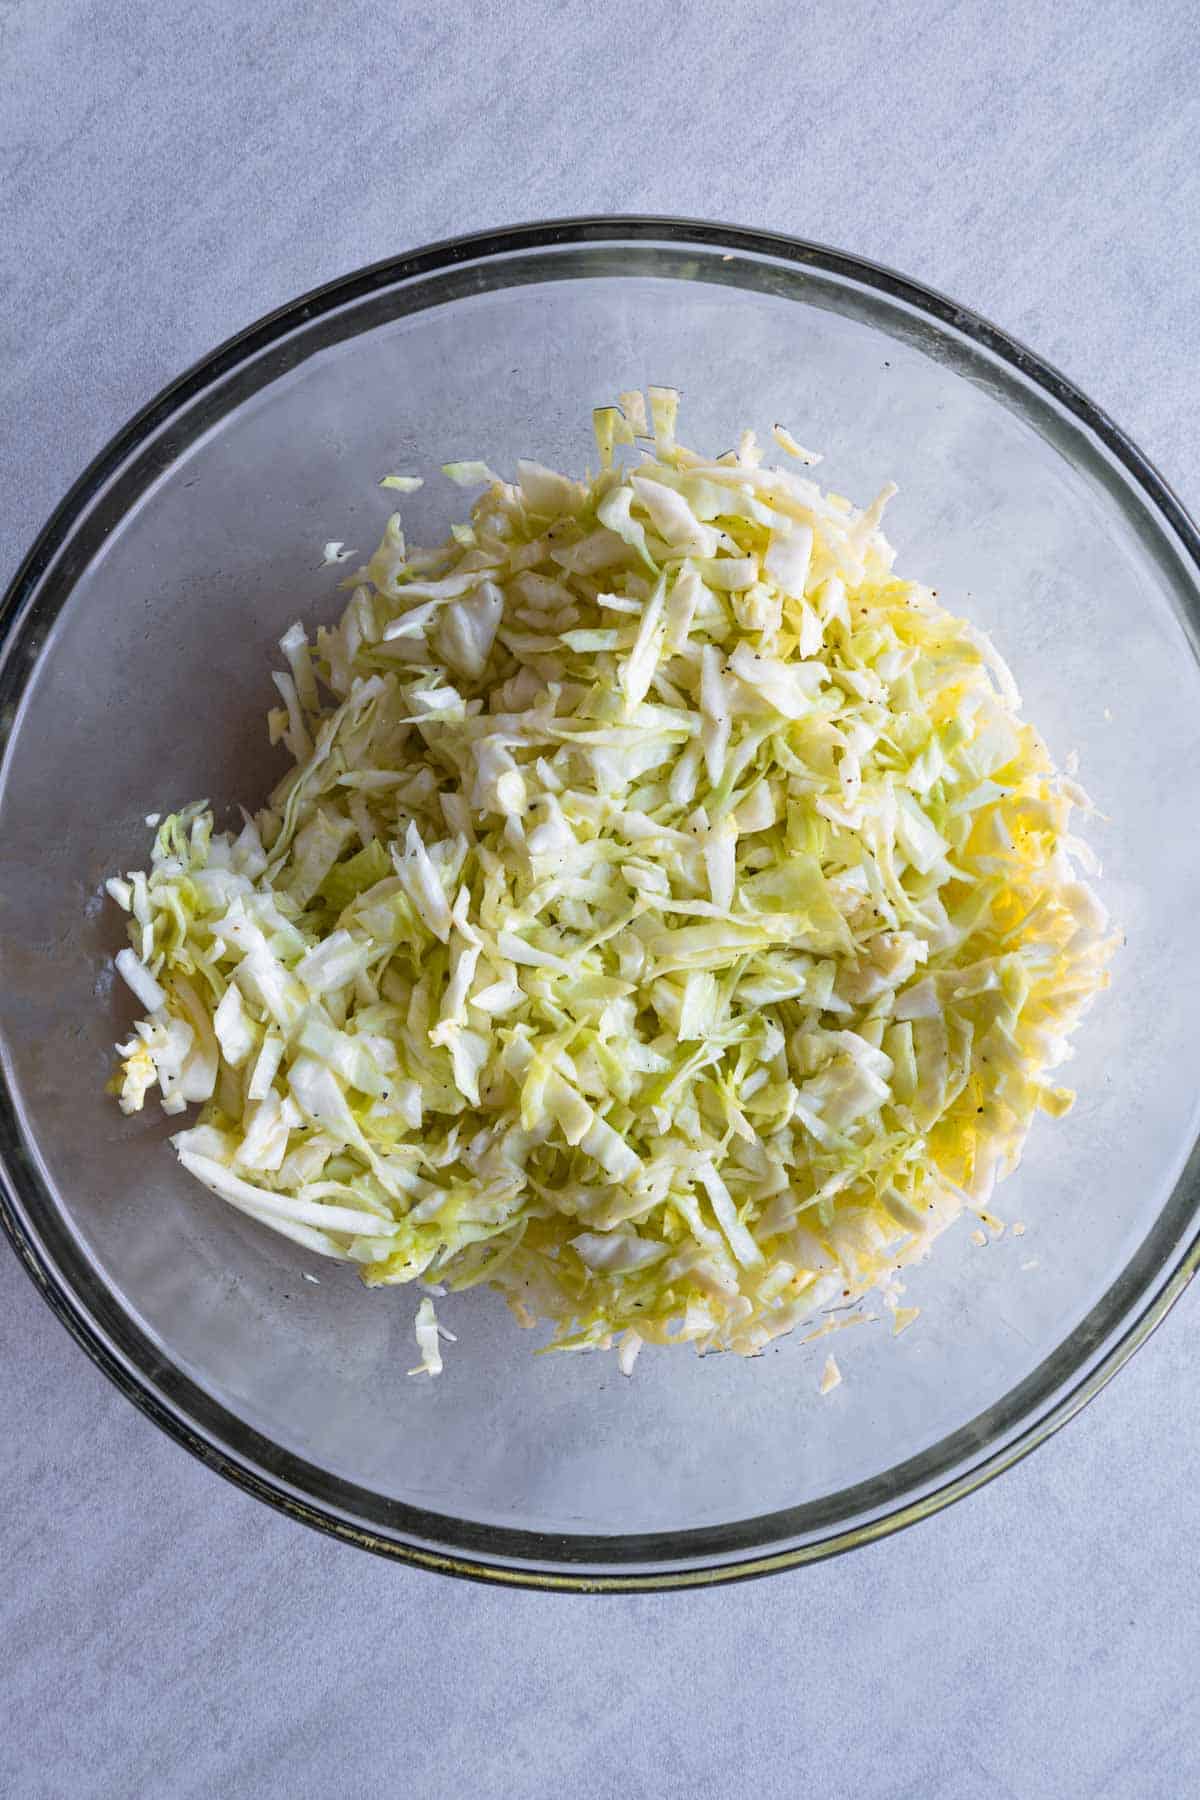 Shredded green cabbage tossed with olive oil and black pepper in a glass bowl.